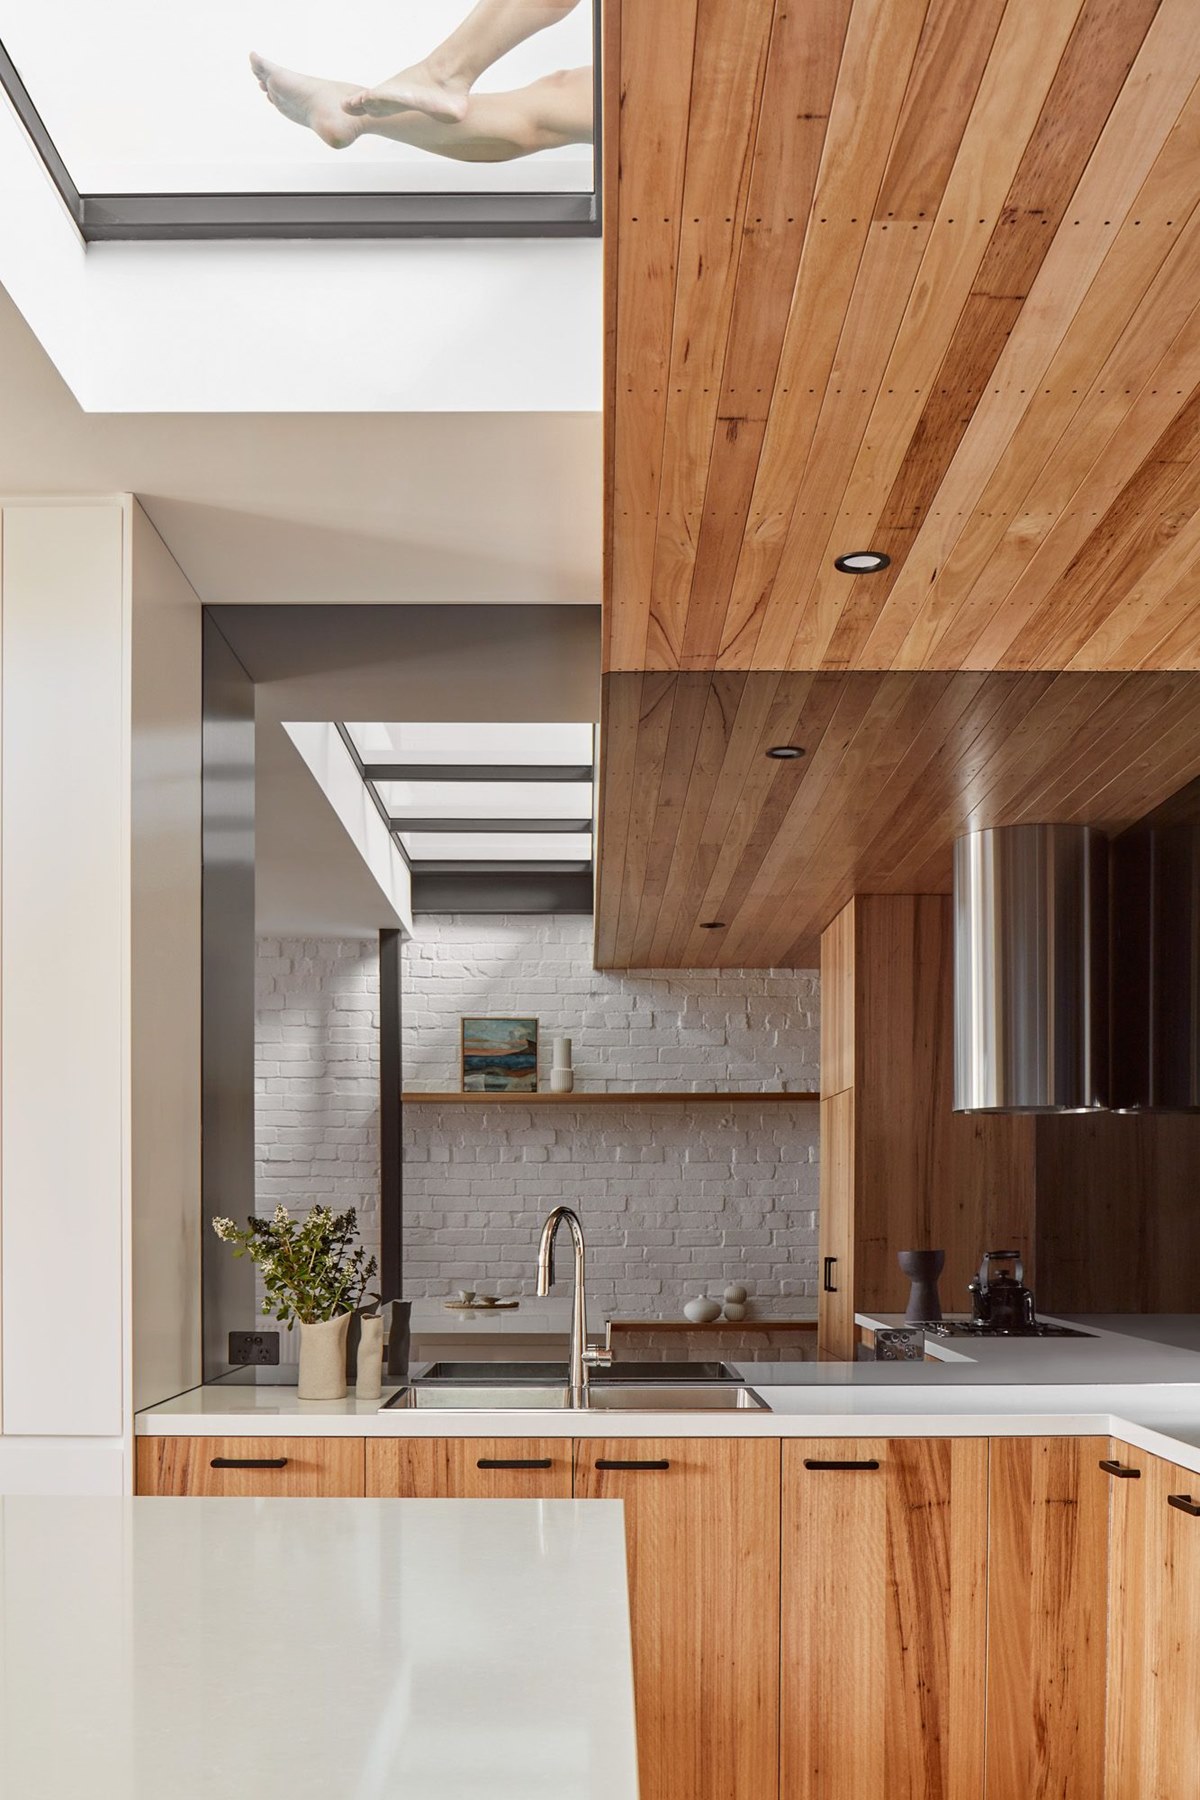 Heritage Terrace Extension in Carlton North Brings in Sunlight and Natural Elements
